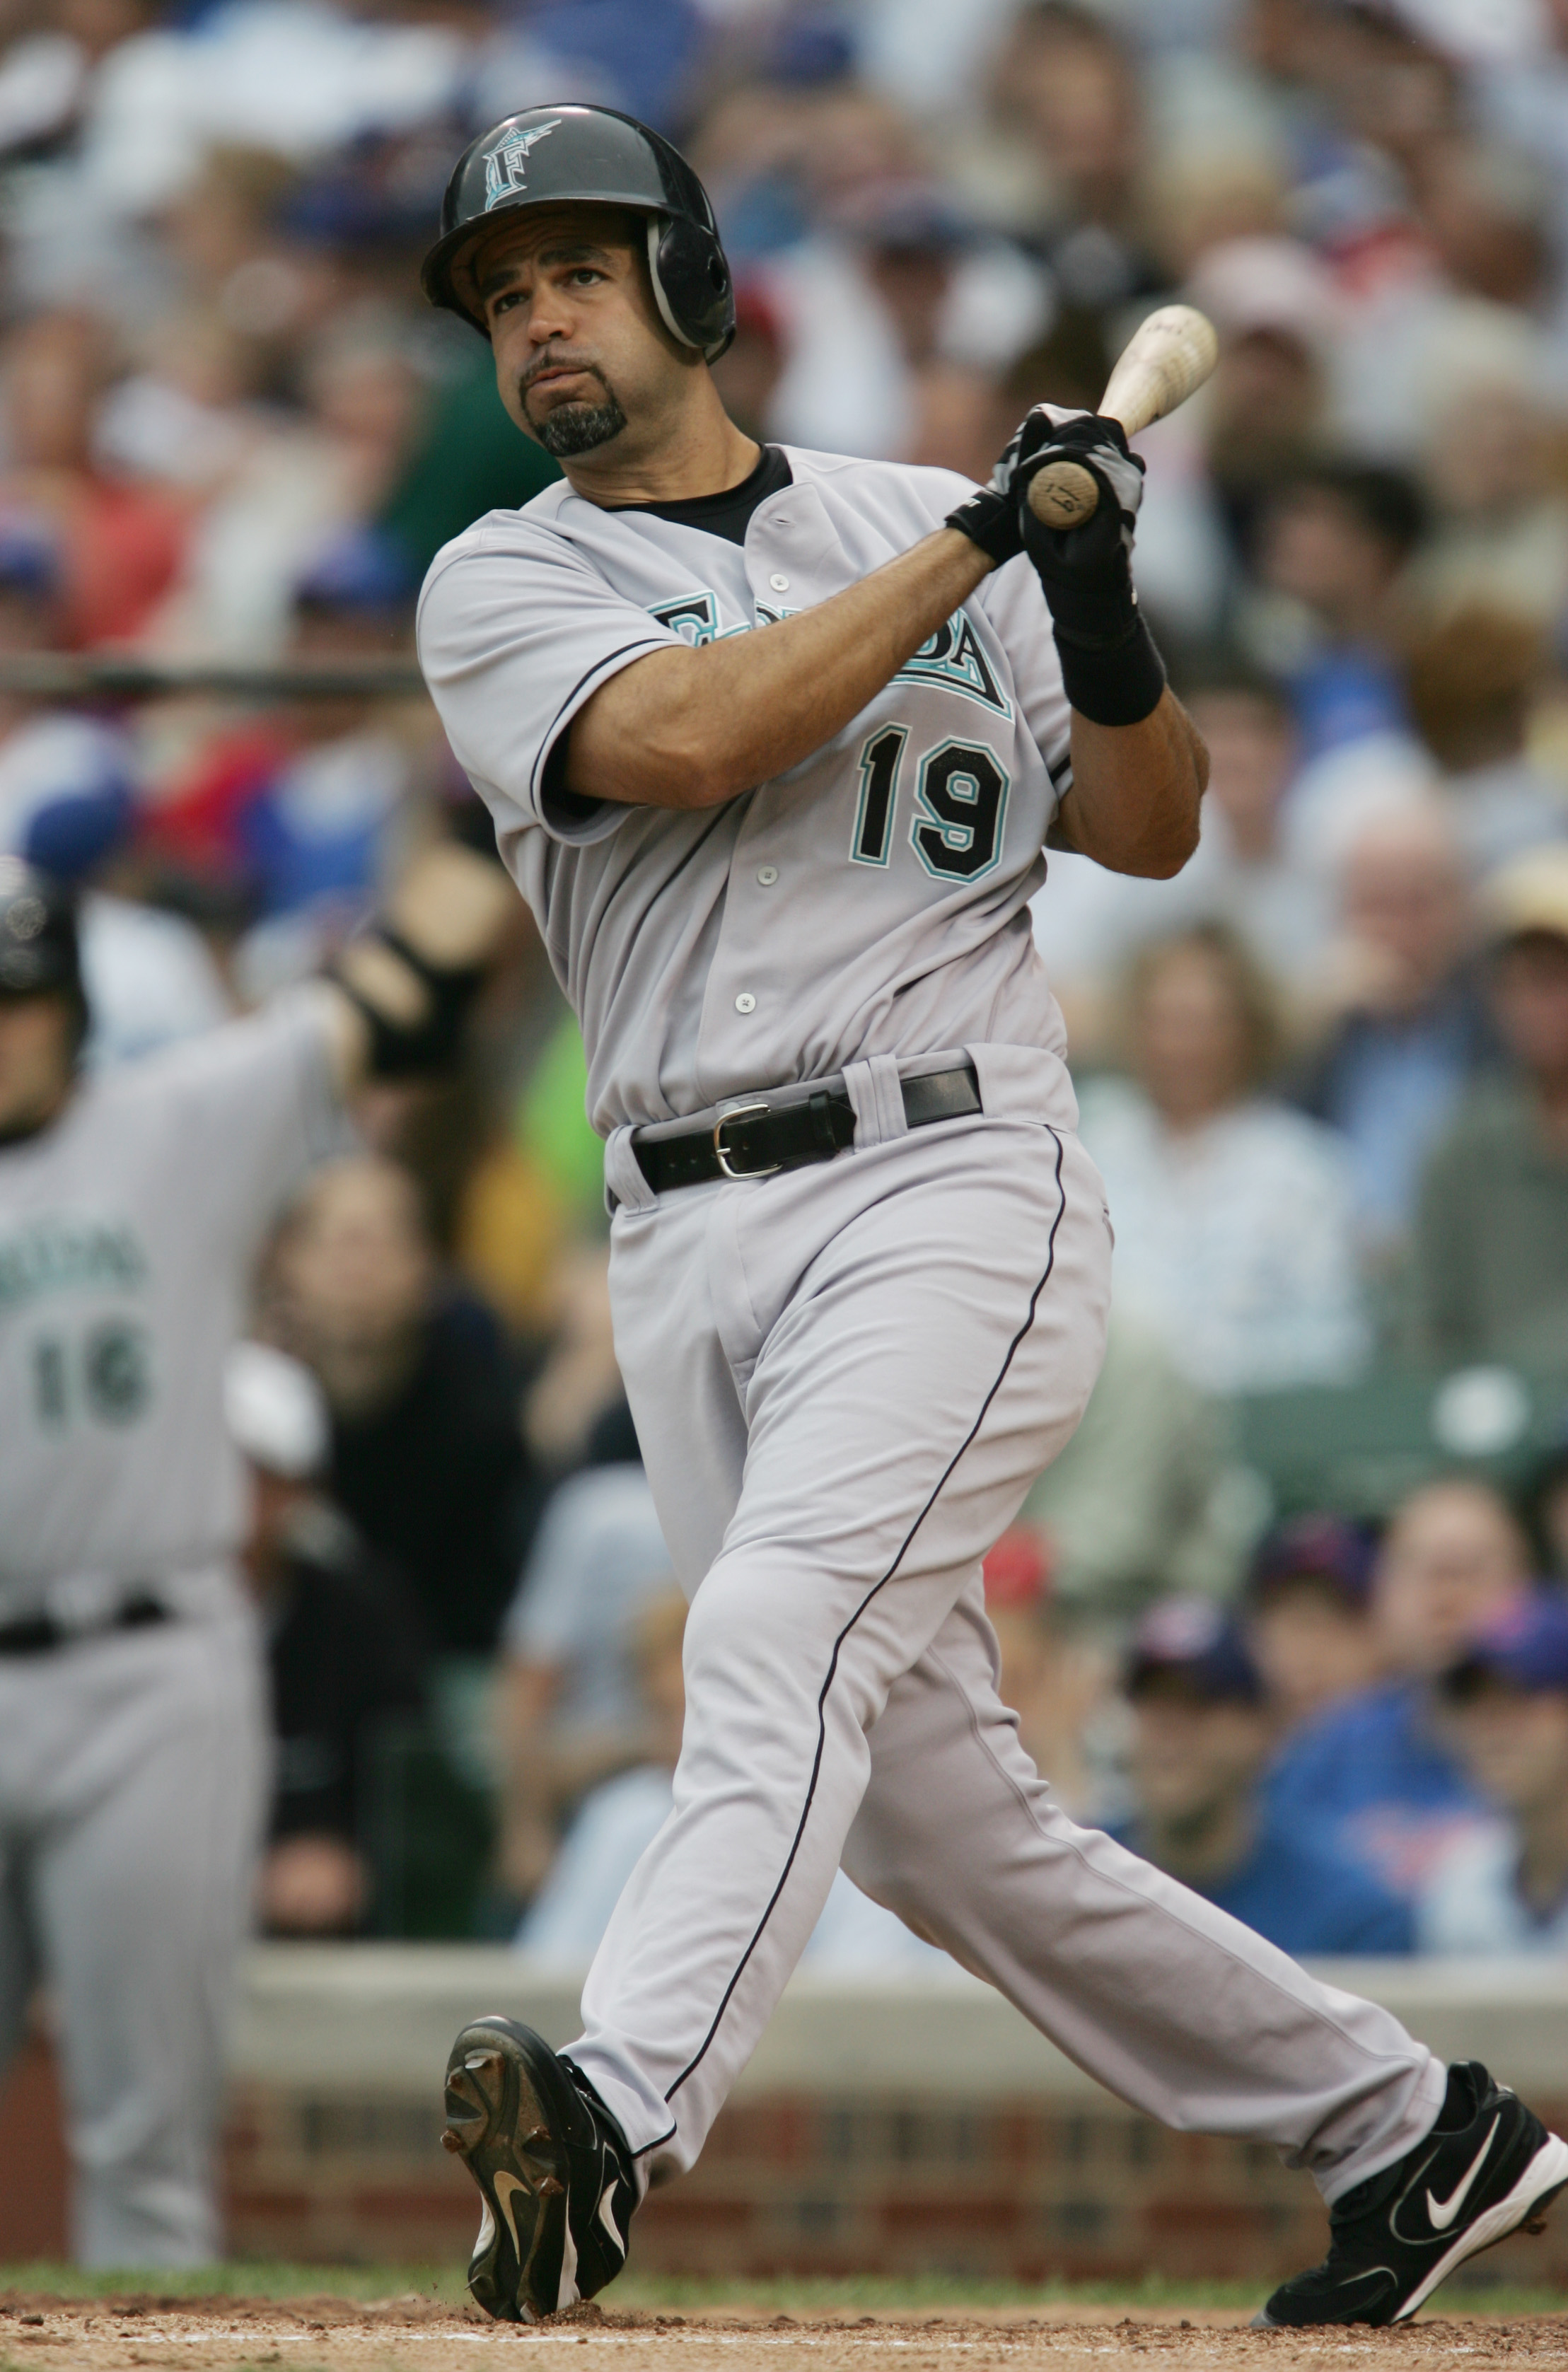 CHICAGO - JUNE 15:  Mike Lowell #19 of the Florida Marlins at bat against the Chicago Cubs on June 15, 2005 at Wrigley Field in Chicago, Illinois. The Marlins defeated the Cubs 15-5. (Photo by Jonathan Daniel/Getty Images)